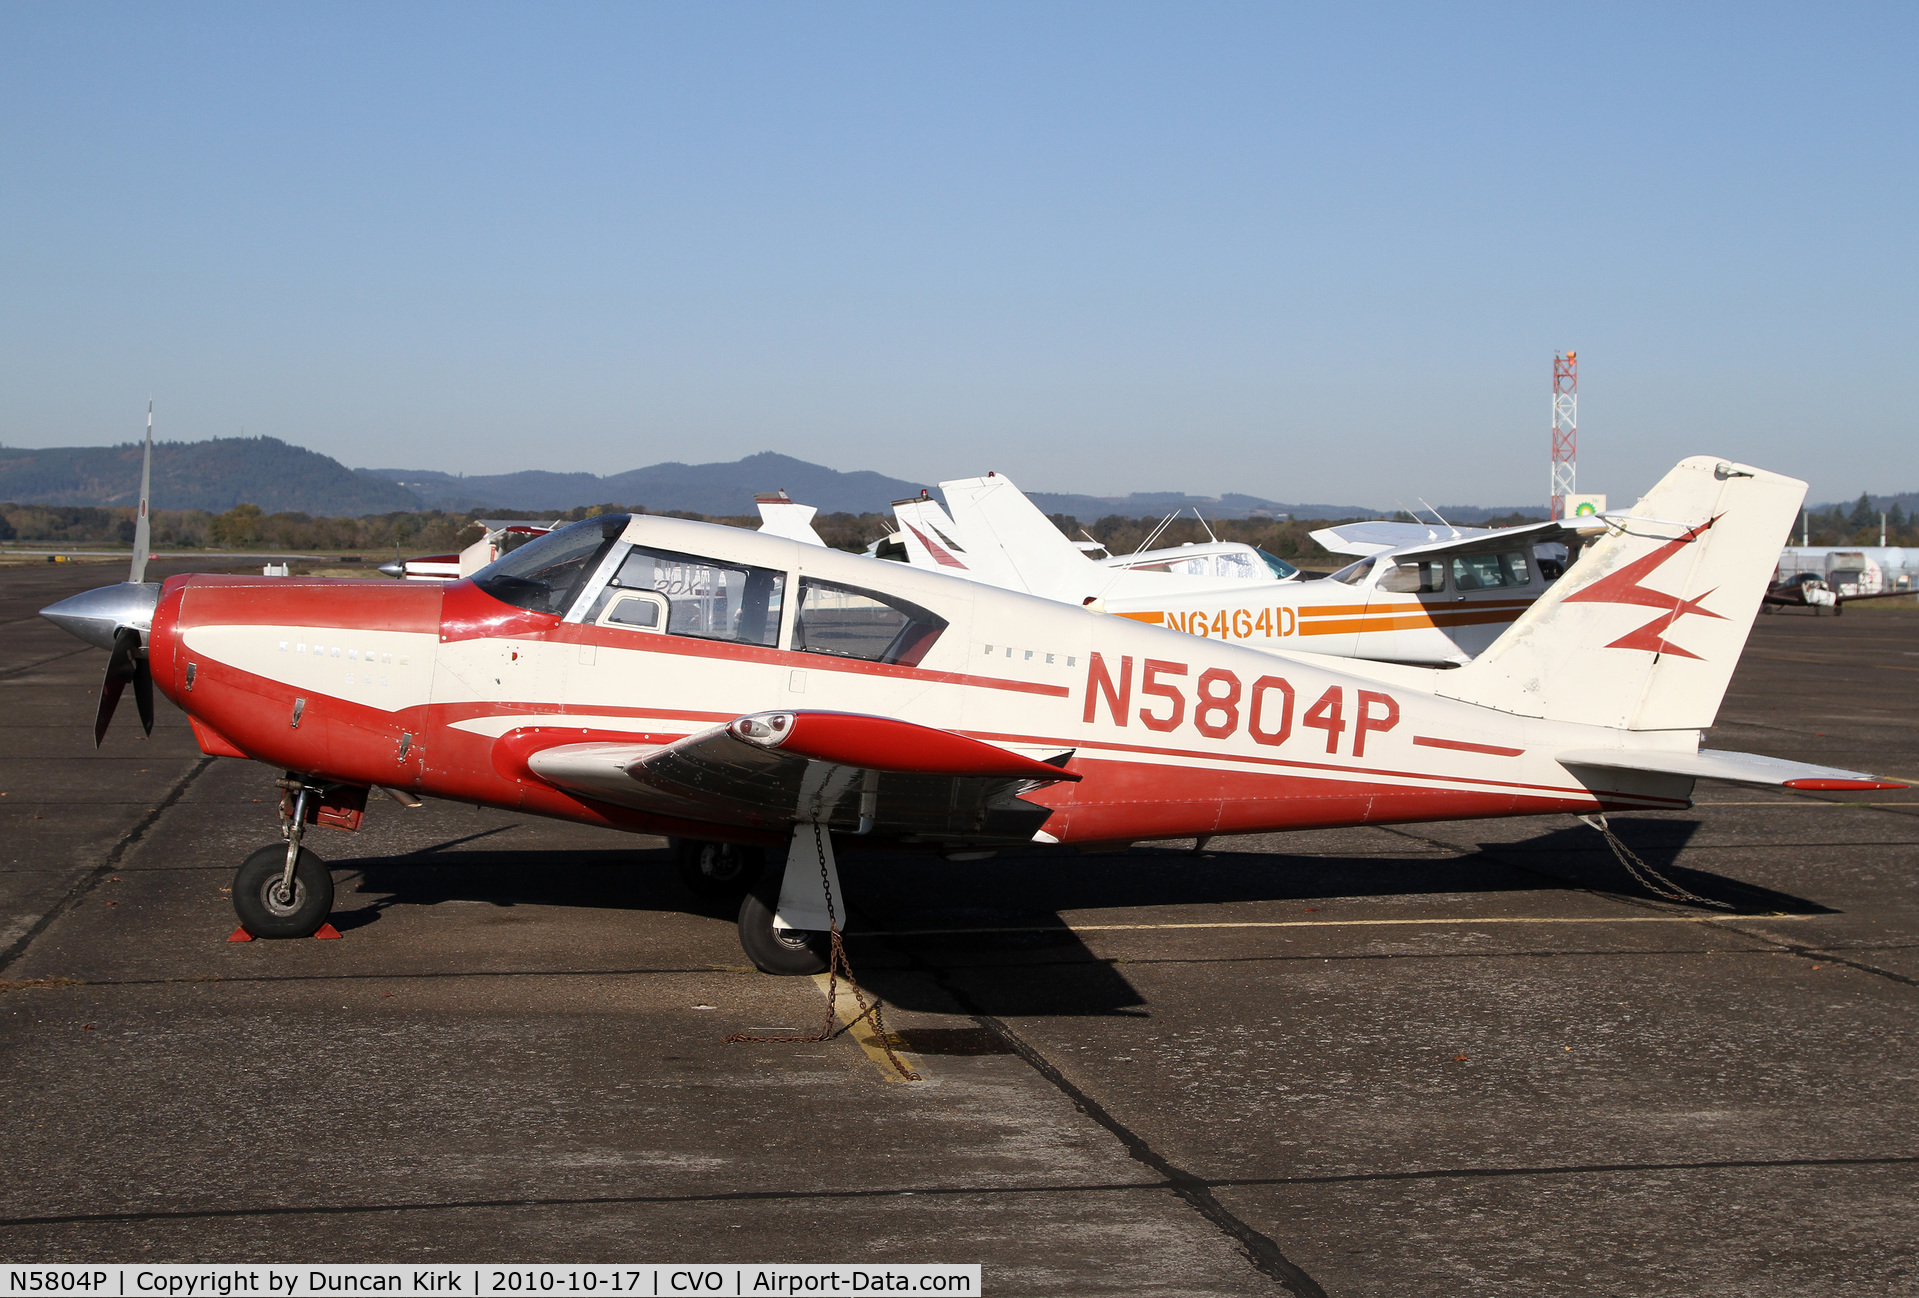 N5804P, 1959 Piper PA-24-250 Comanche C/N 24-884, Tons of Comanches still exist and this one is 51 years old!